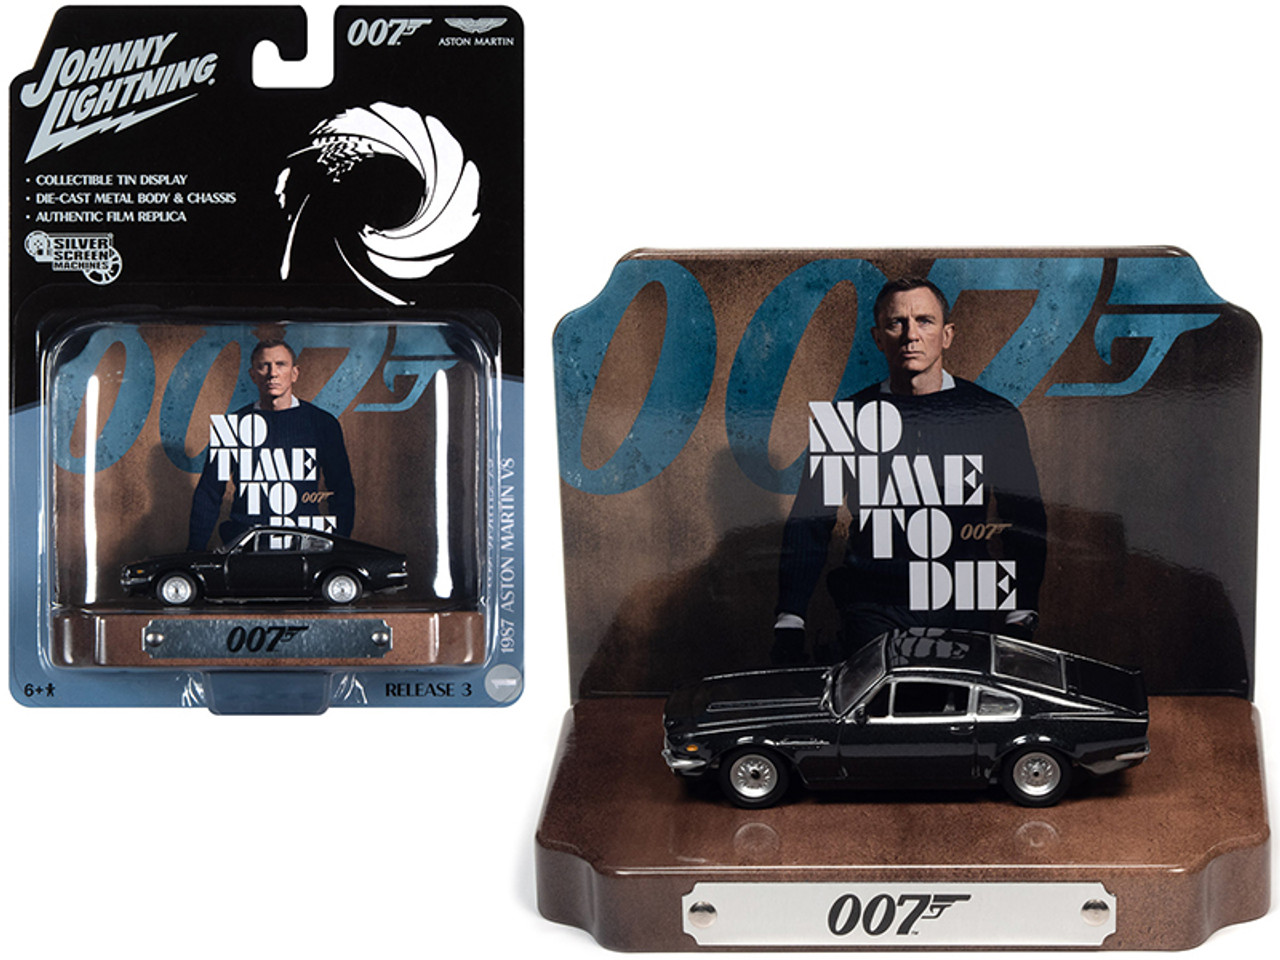 1987 Aston Martin Vantage V8 Cumberland Gray with Collectible Tin Display "007" (James Bond) "No Time to Die" (2021) Movie (25th in the James Bond Series) 1/64 Diecast Model Car by Johnny Lightning